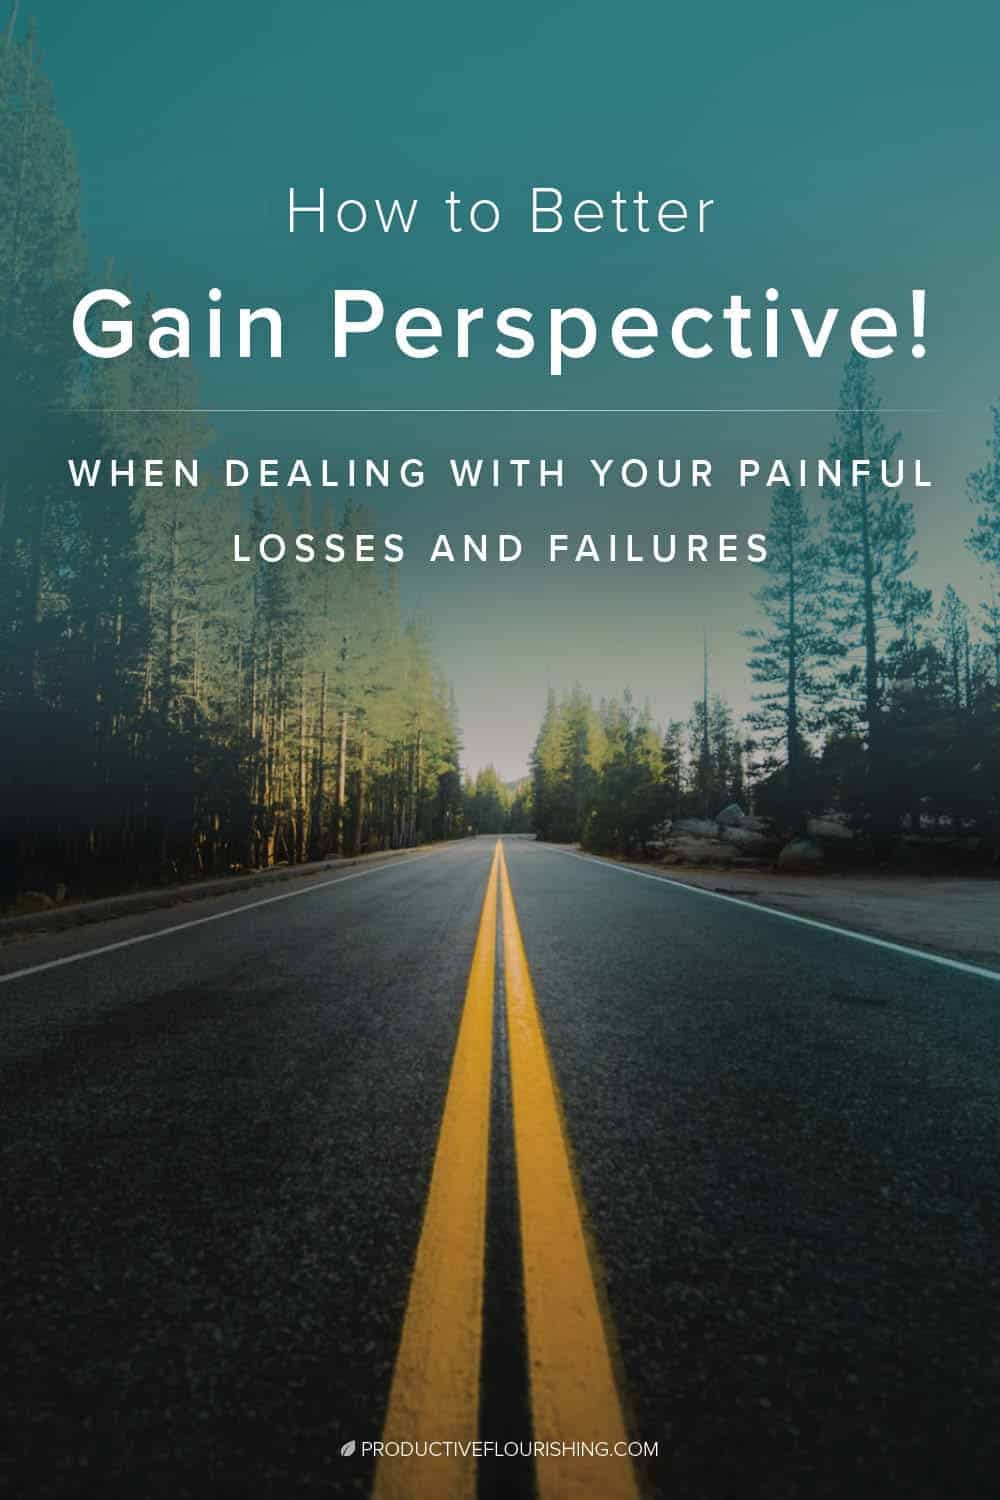 Learn how to gain perspective when dealing with your painful losses and failures. #productiveflourishing #successfulmindset #entrepreneur